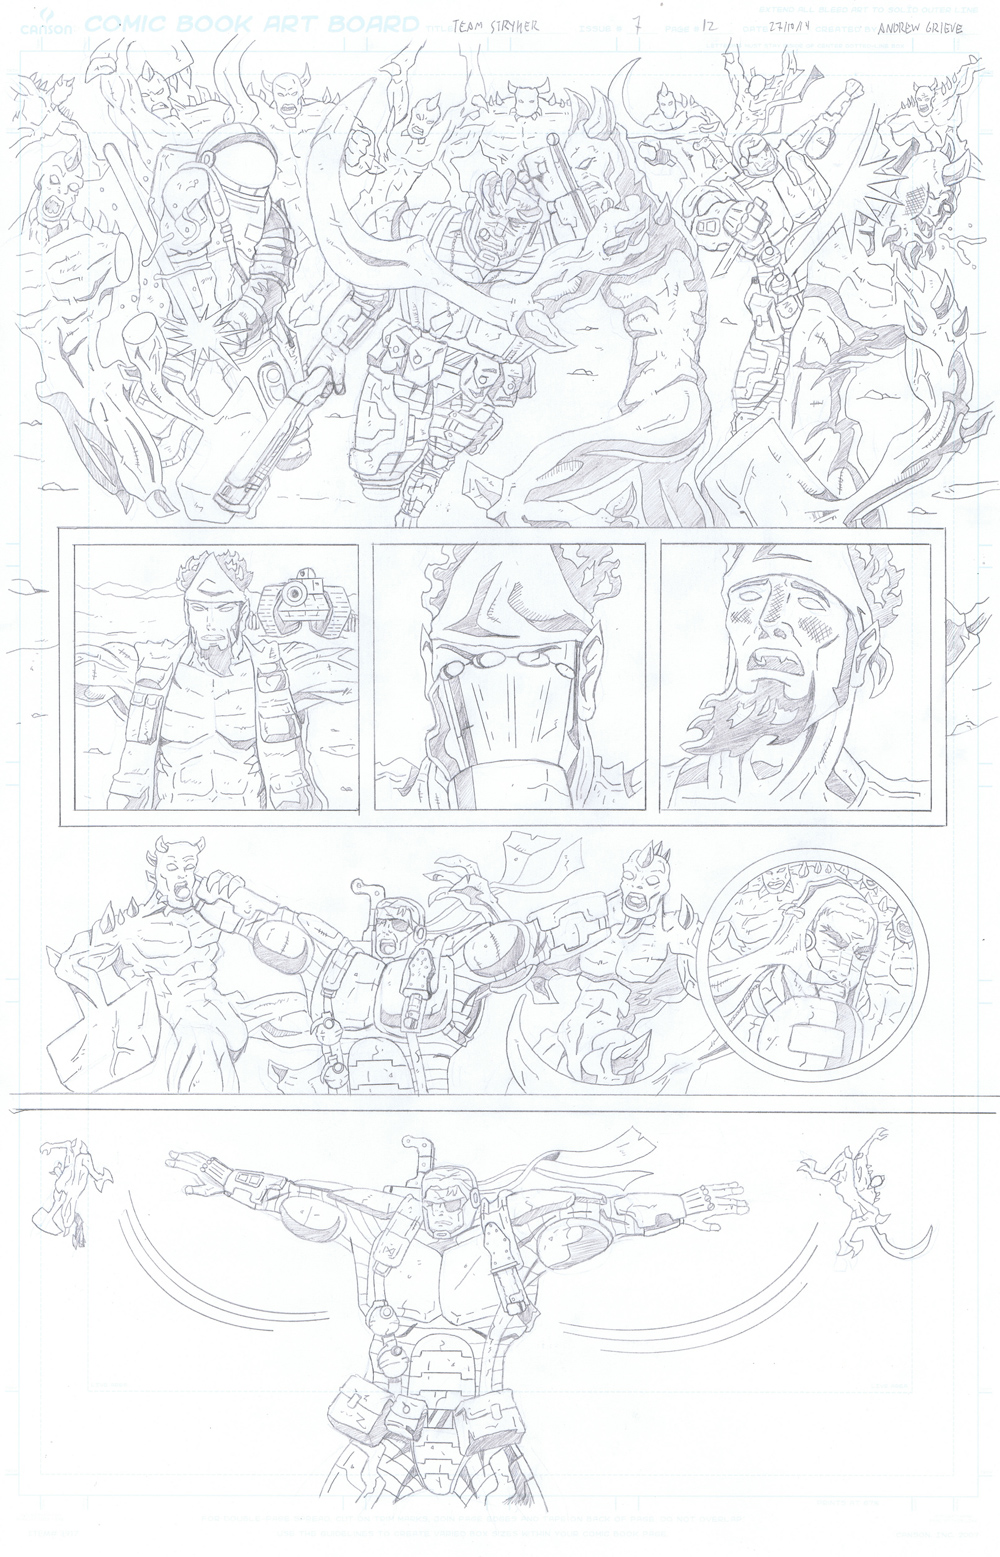 MISSION 007: PAGE 12 PENCIL